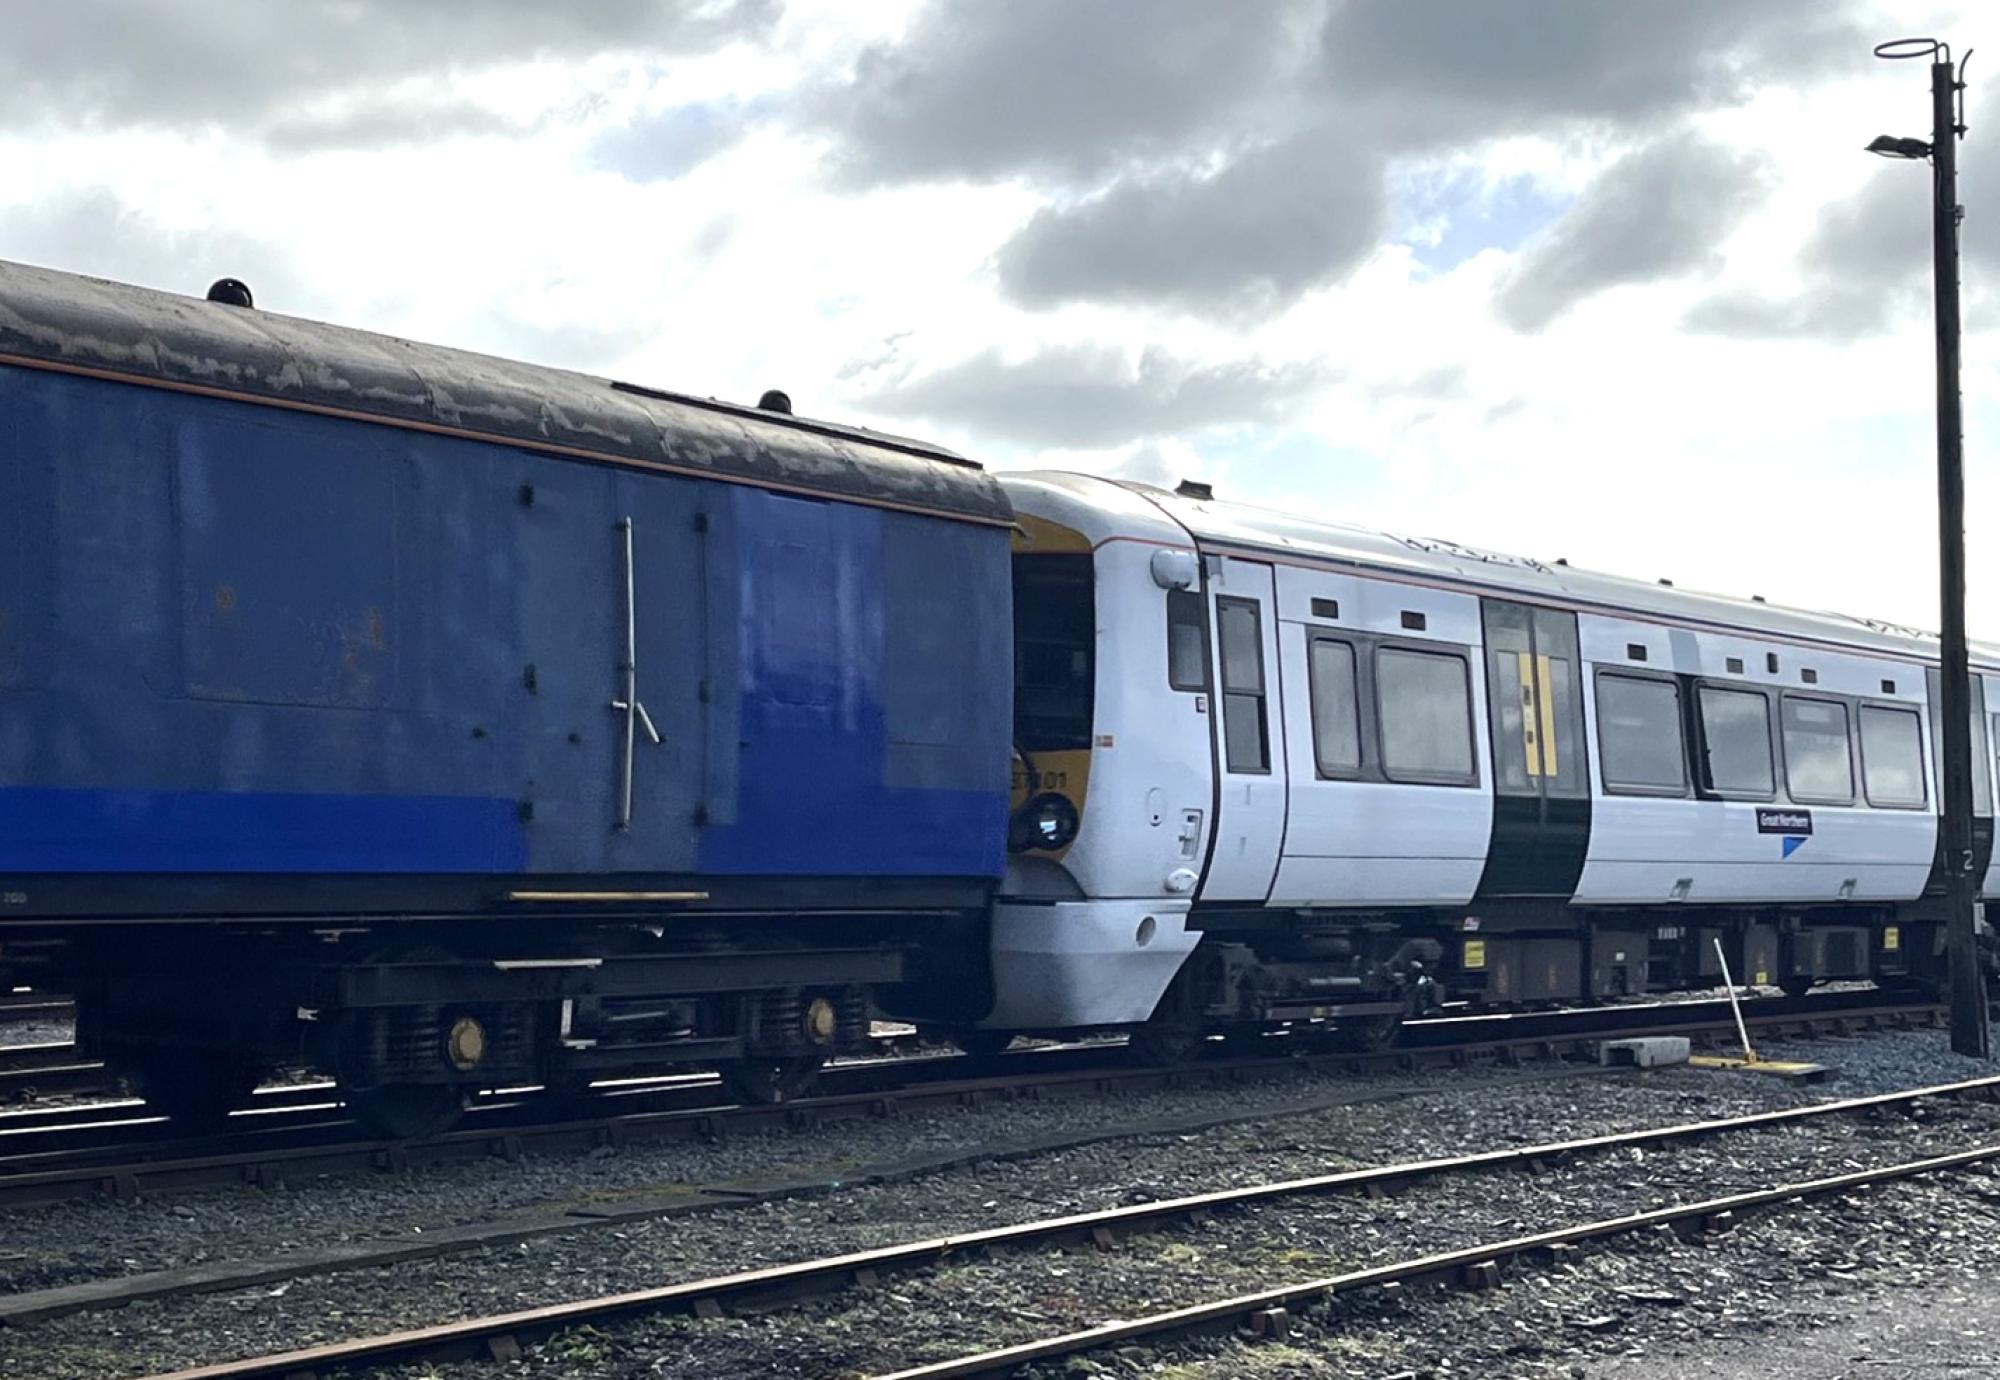 Static testing a success for Thameslink’s digital in-cab signalling equipment